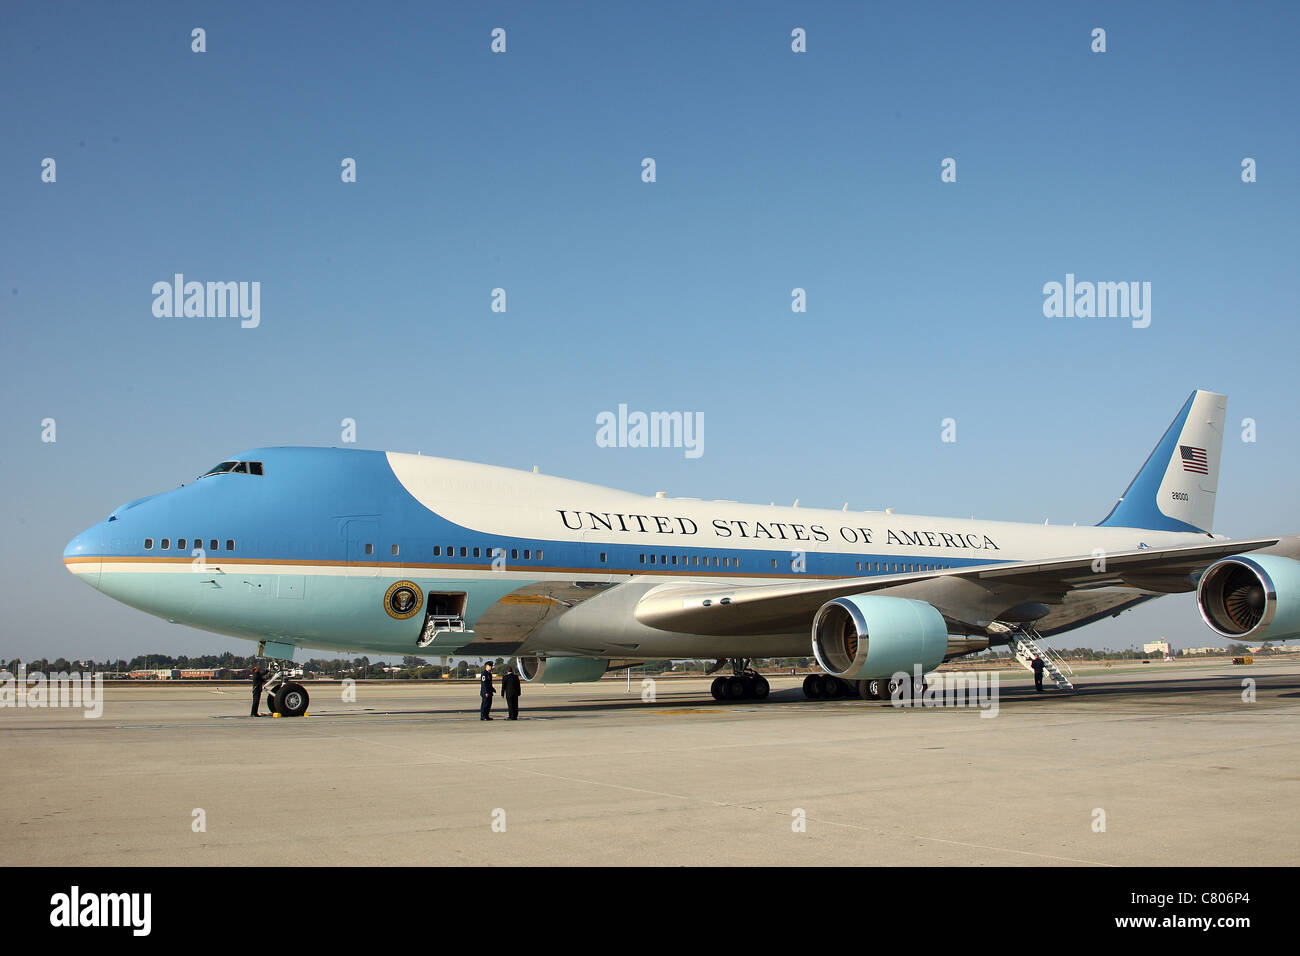 AIR FORCE ONE US PRESIDENT BARACK OBAMA LANDS AT LAX LOS ANGELES CALIFORNIA USA 26 September 2011 Stock Photo